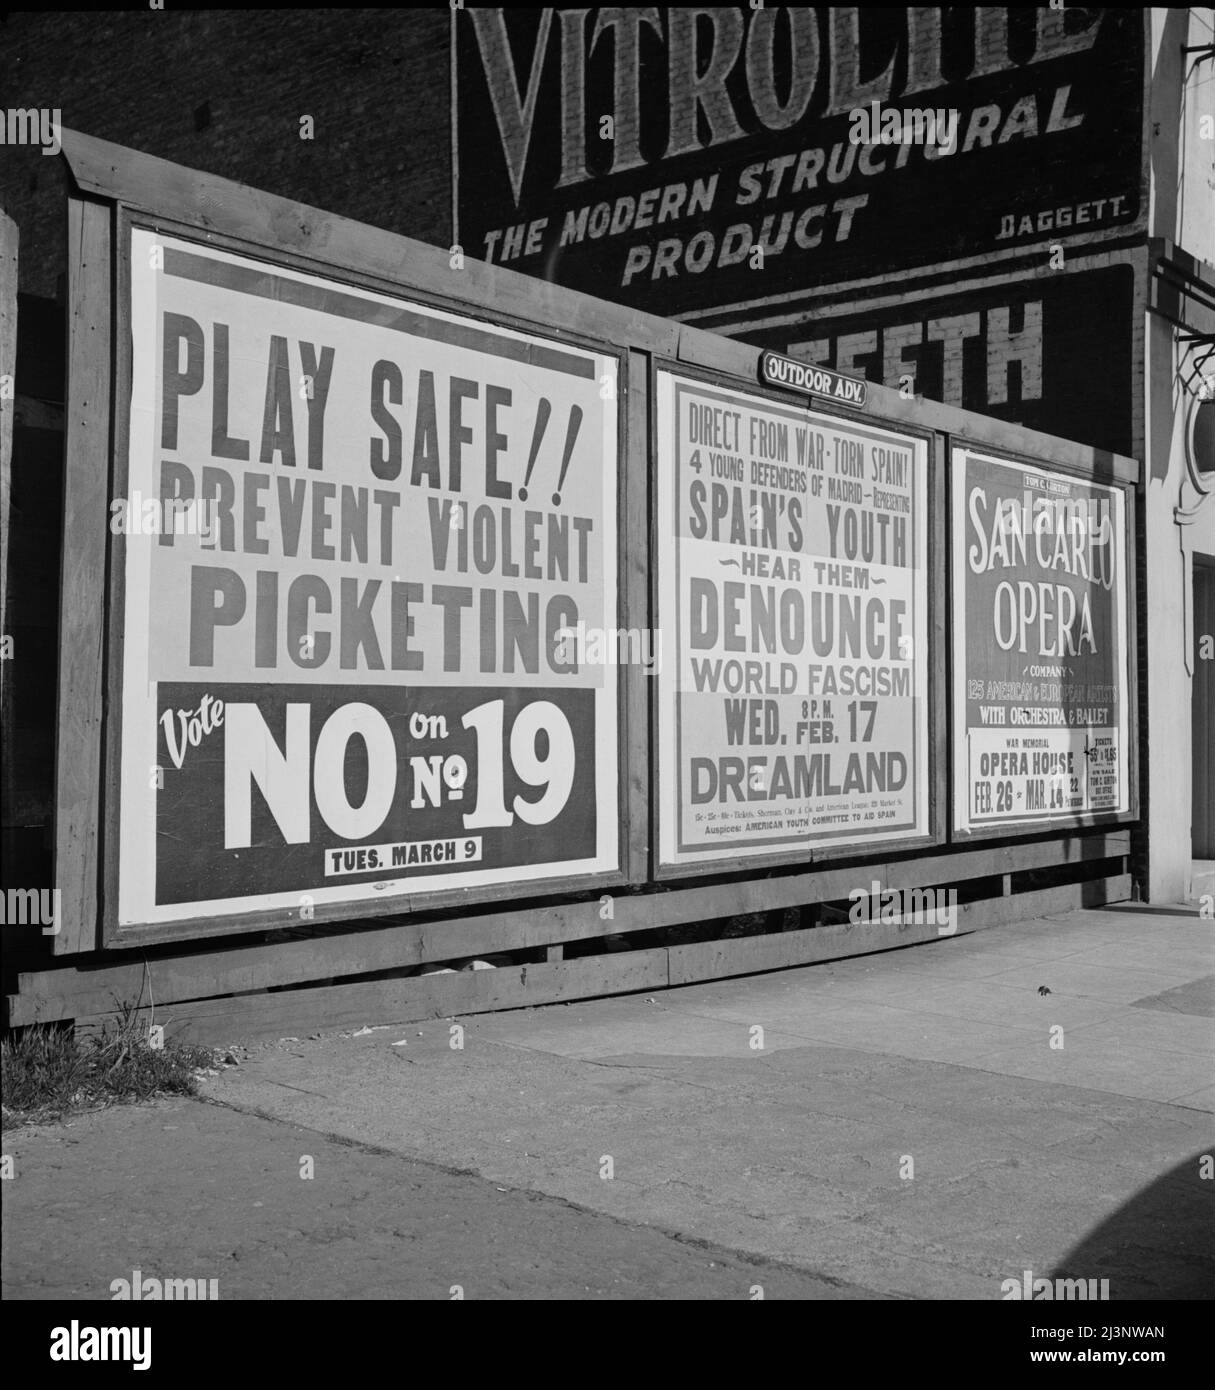 Signboards in San Francisco, California. ['Play Safe!! Prevent Violent Picketing - Vote No on No,19; Tues March 9'. 'Direct from War-Torn Spain - 4 Young Defenders of Madrid representing Spain's Youth - Hear Them Denounce World Fascism - 8pm Wed. Feb. 17th, Dreamland']. Stock Photo